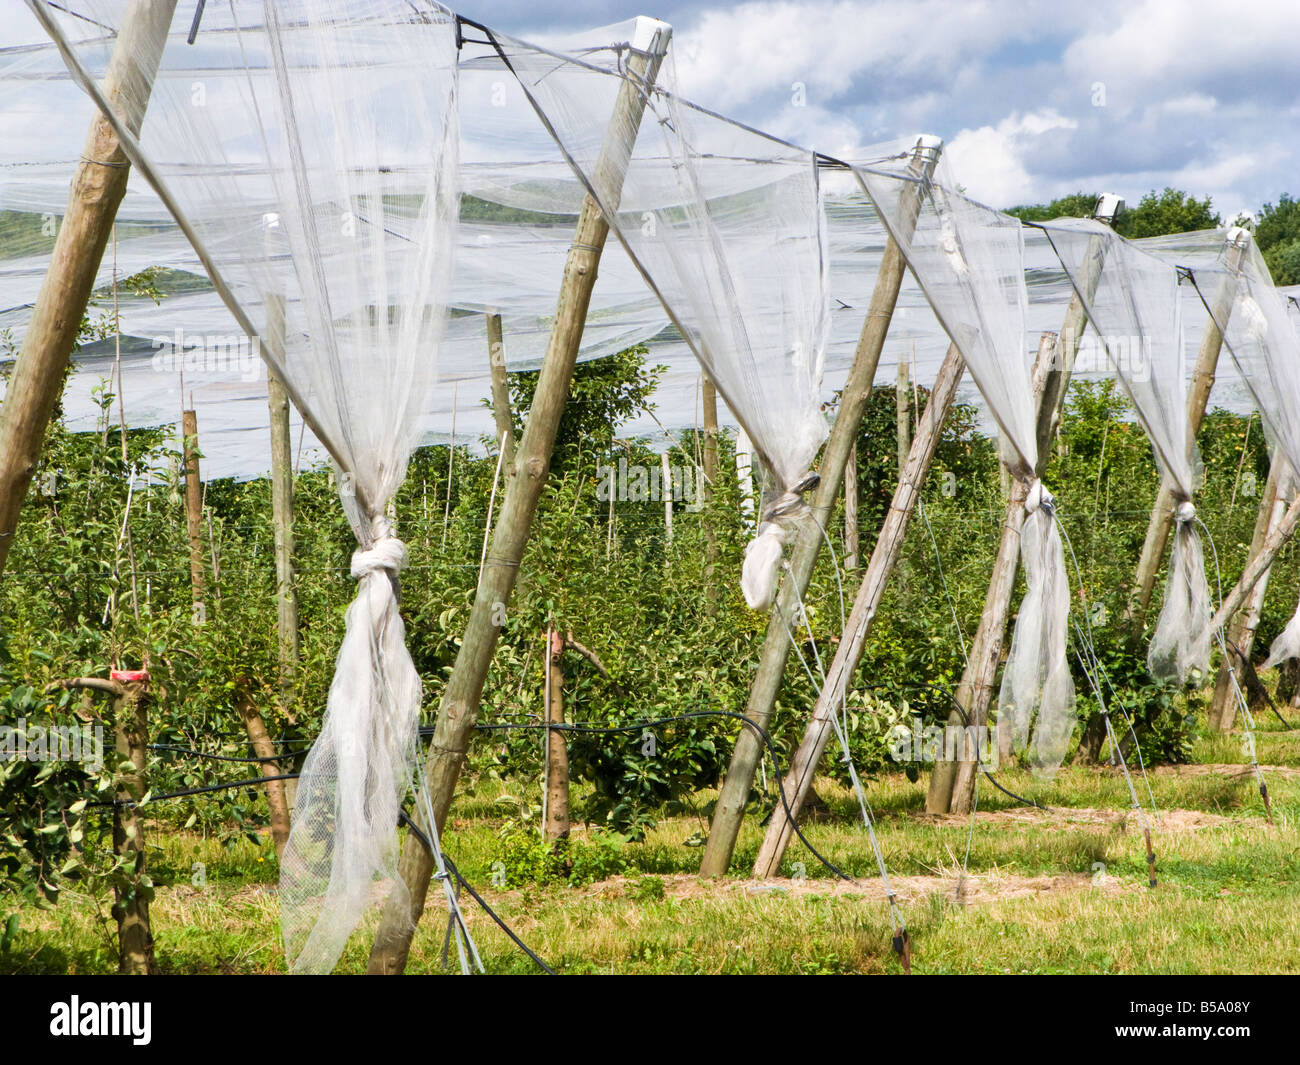 Large cloches protecting early growth of fruit trees in the French countryside Tarn et Garonne France Europe Stock Photo